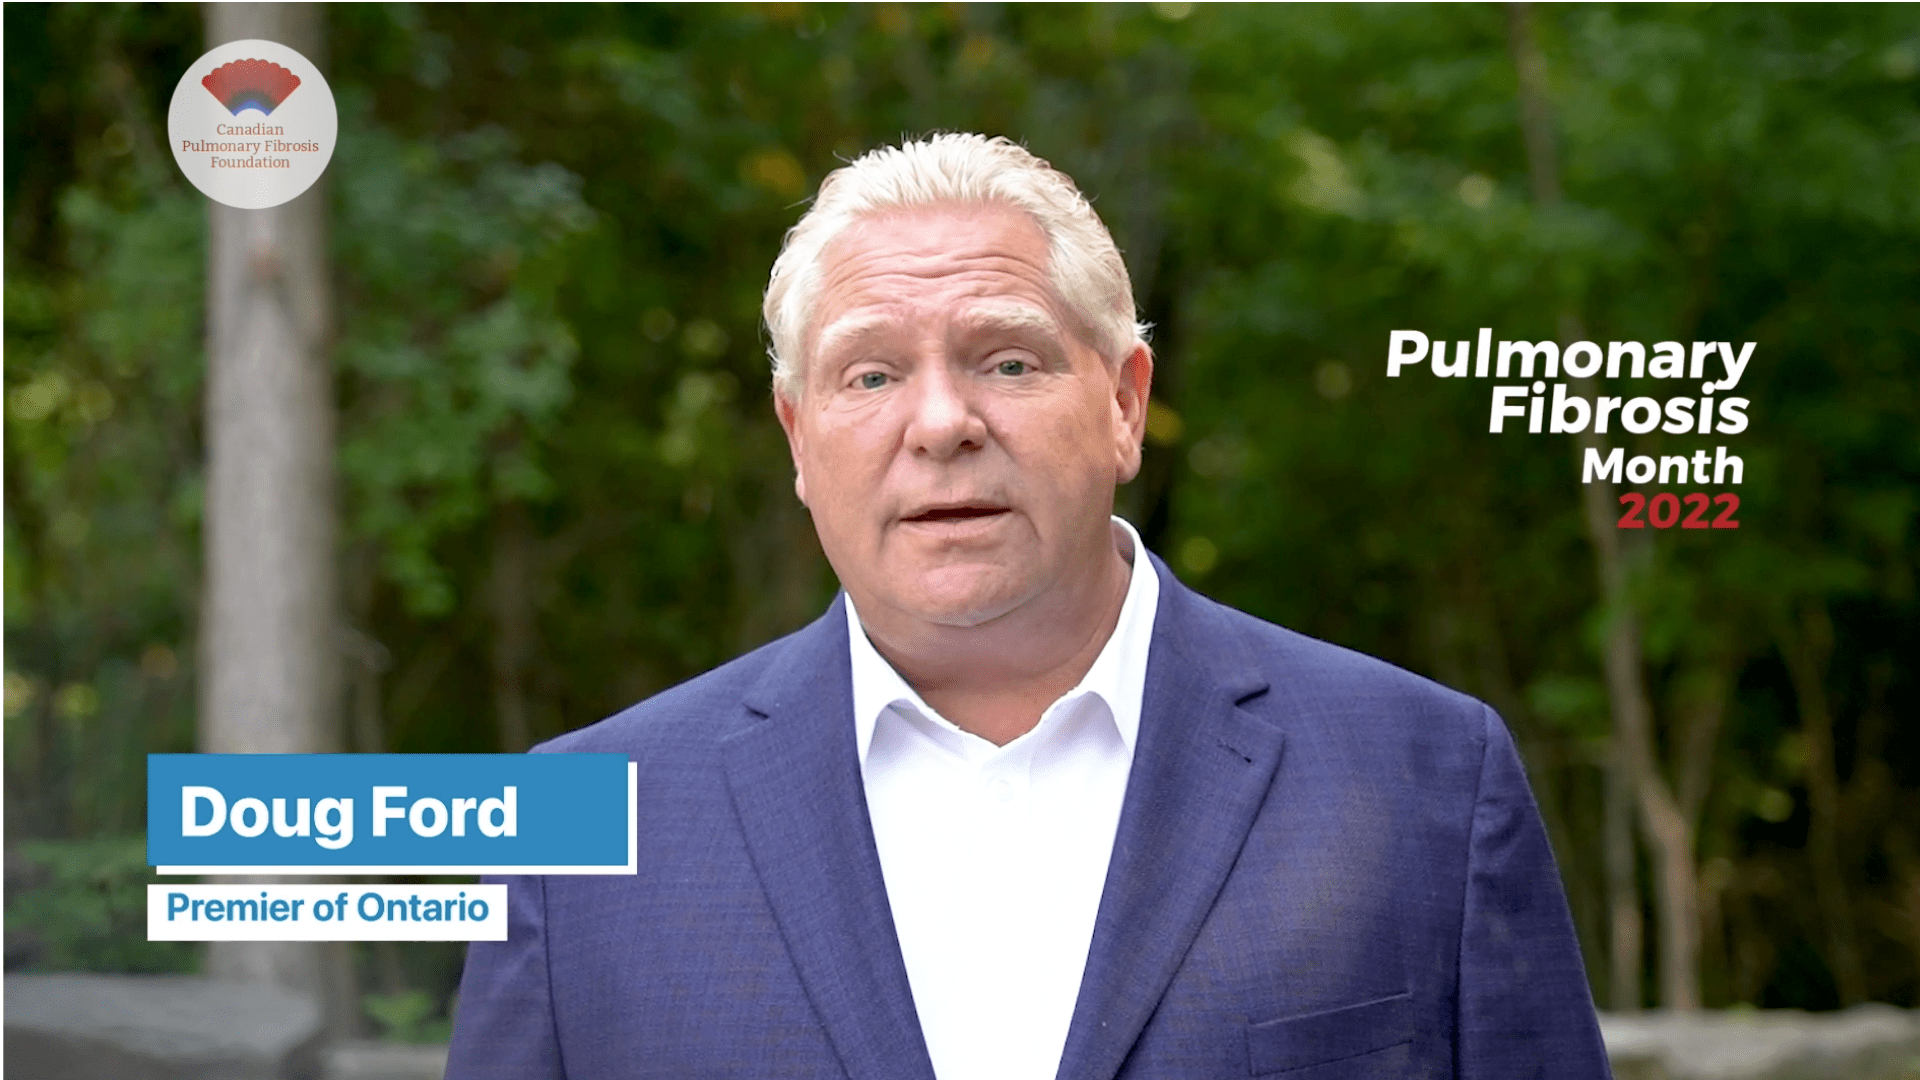 Greetings from Ontario Premier Doug Ford for PF Month